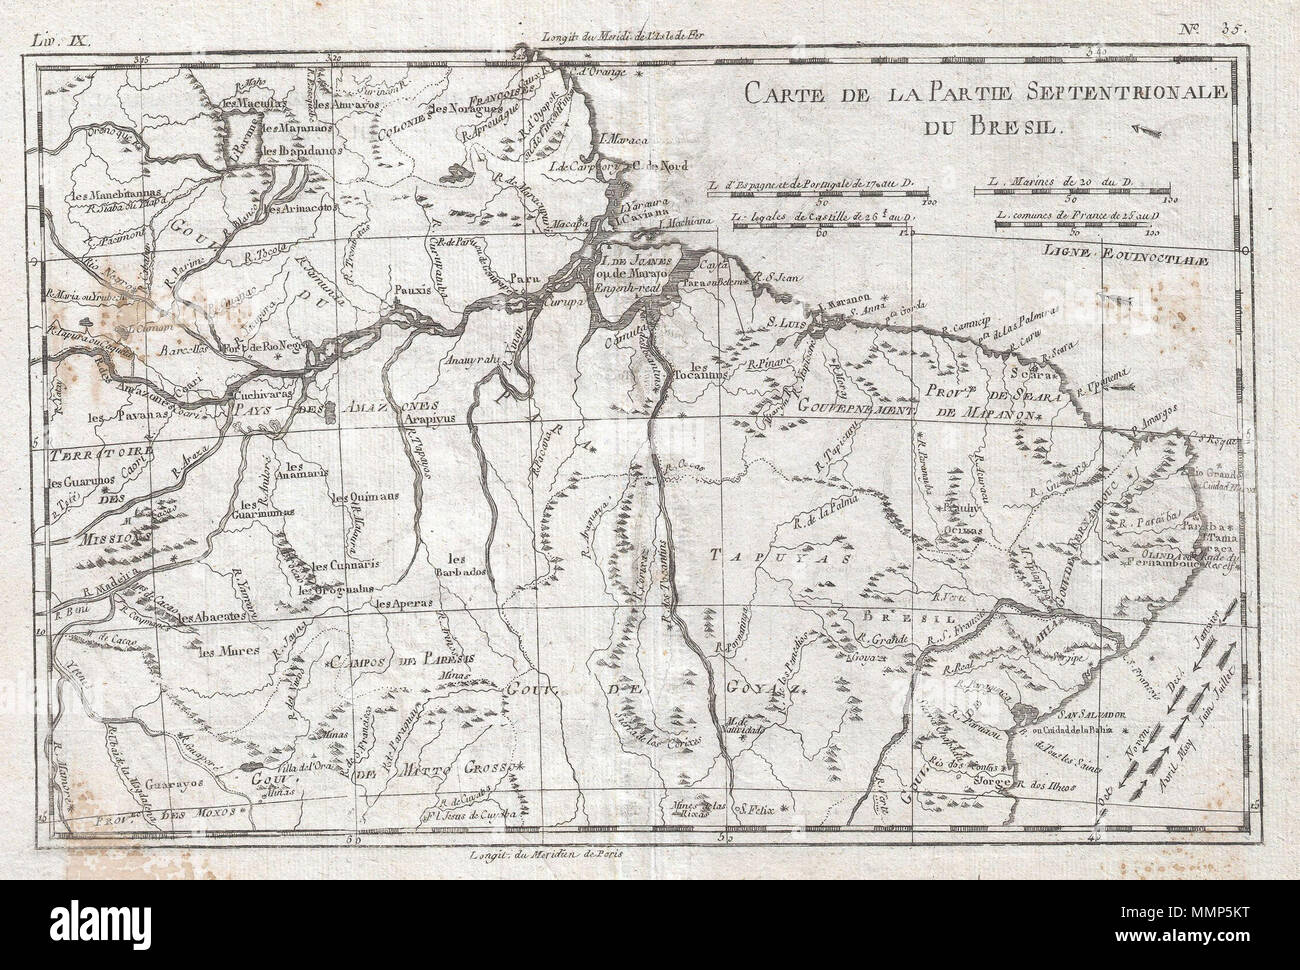 .  English: A fine example of Rigobert Bonne and Guilleme Raynal’s 1780 map of Northern Brazil. This detailed map features the northern portion of Brazil from Bahia to Guyana. This also includes a portion of the Amazon River and its adjancet rainforest, the largest and most species-rich tract of forest in the world. Of note is the legendary Lake Parime in the northwest. It was on the shores of this lake that many explorers believed they could find the city of Manoa, or El Dorado. Explorers such as Sir Walter Raleigh searched this area in a vain attempt locate the lake and legendary City of Gol Stock Photo